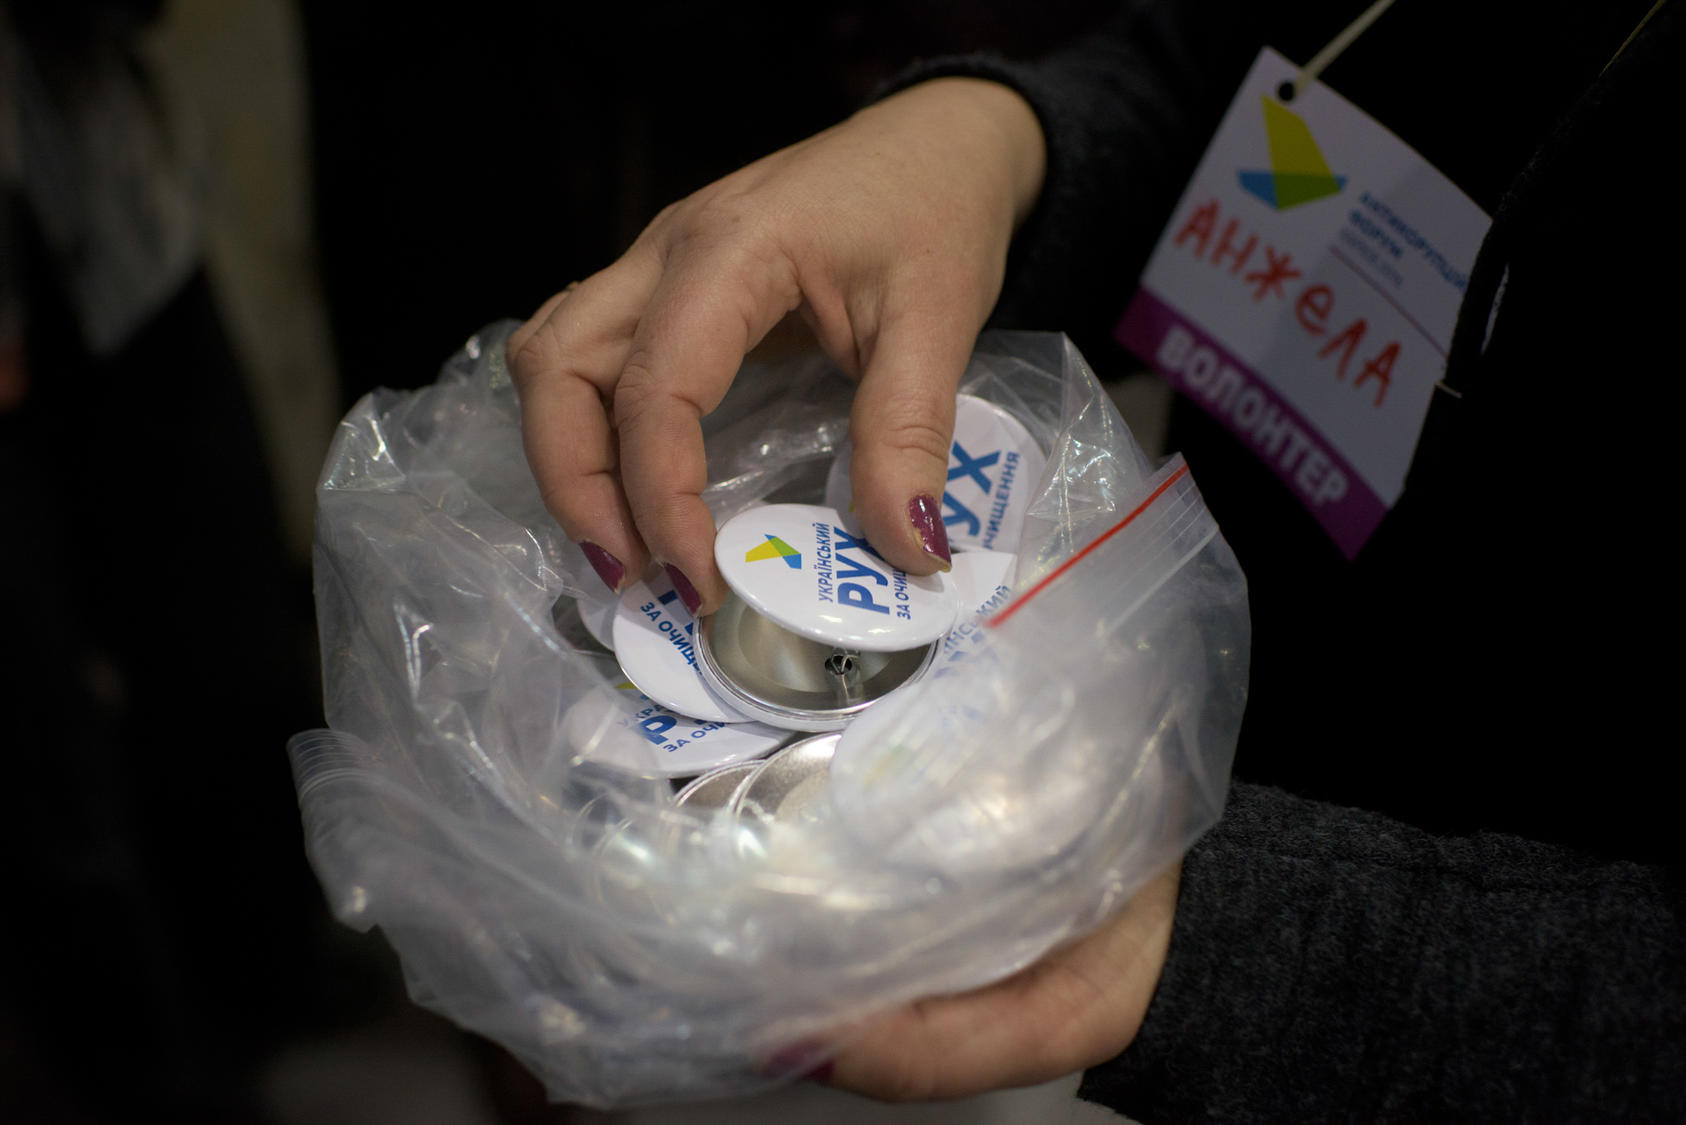 A volunteer distributes buttons for the Cleaning Up Ukraine movement at am anti-corruption forum where Mikheil Saakashvili delivered a speech, in Kharkiv, Ukraine, Jan. 18, 2016. Saakashvili – the former president of Georgia and one of the post-Soviet era’s most contentious and best-known politicians in the region – is making a political comeback in Ukraine as the figurehead of a movement to strip oligarchs of their power. (Pete Kiehart/The New York Times) 